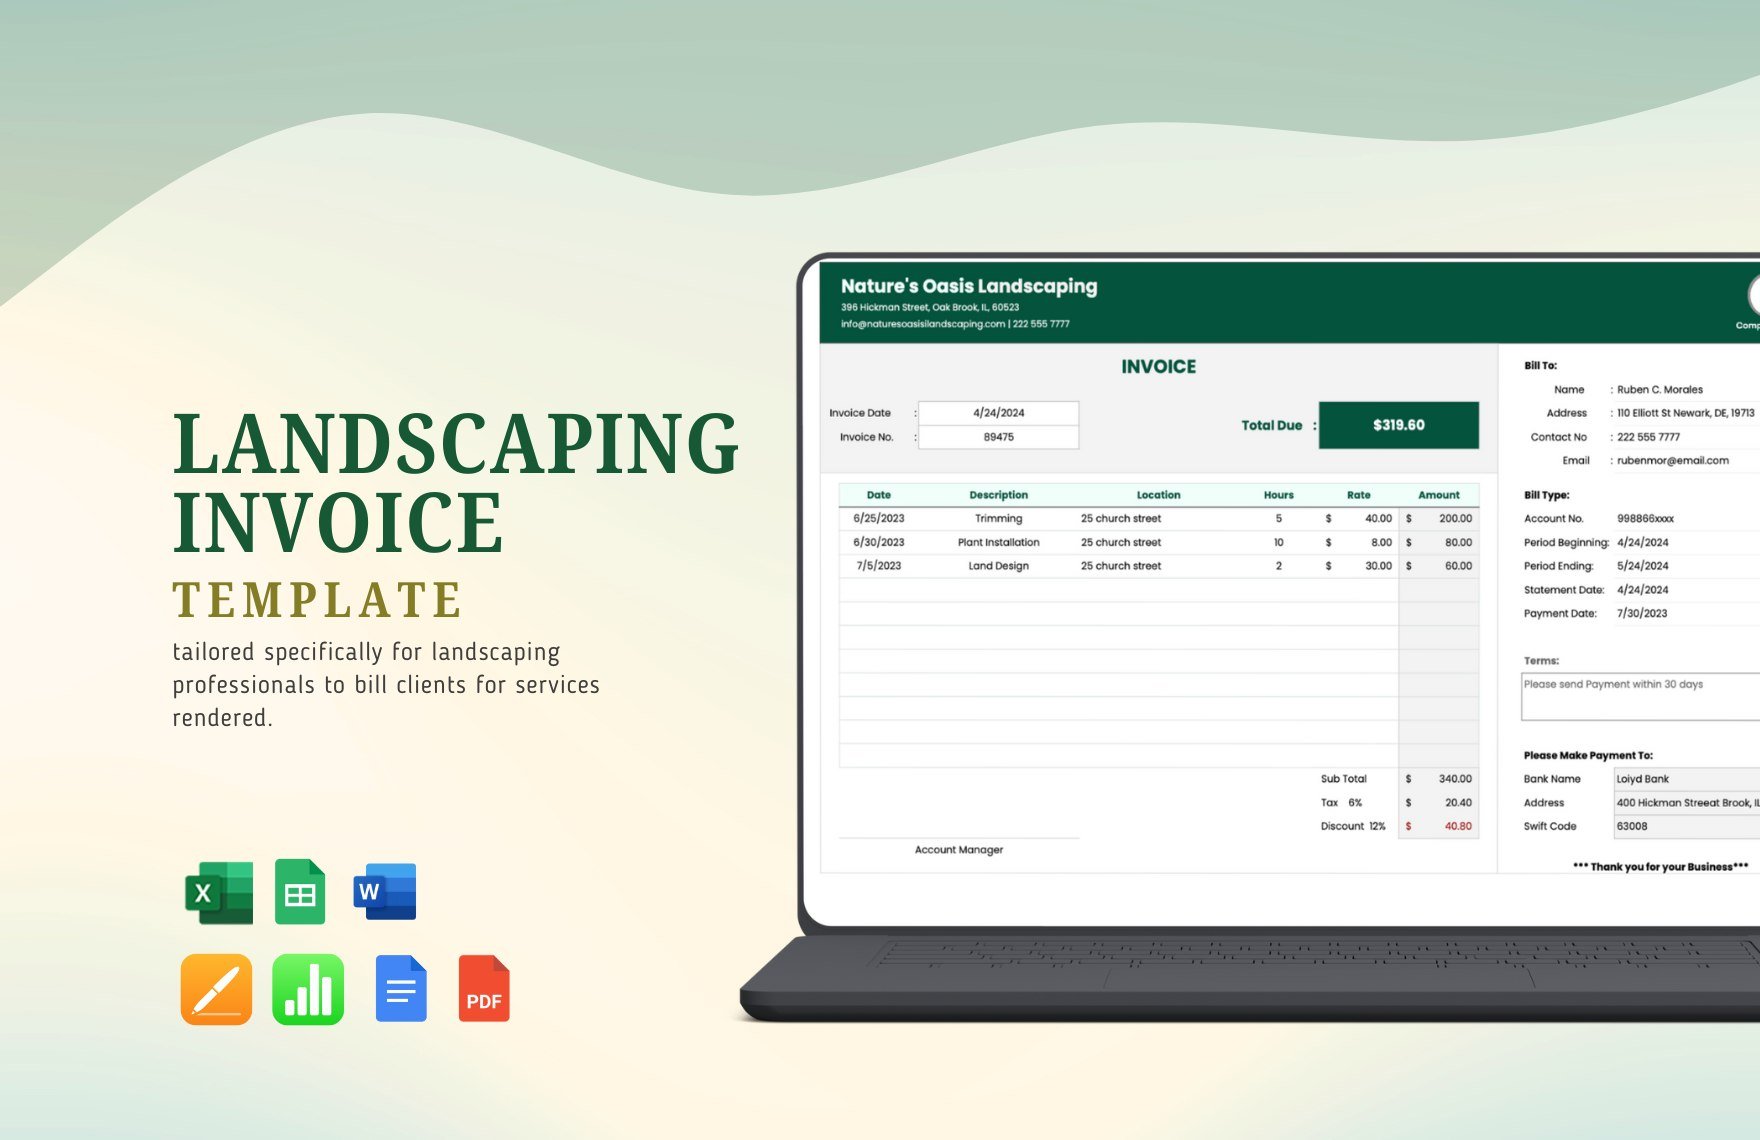 Landscaping Invoice Template in Word, Google Docs, Excel, PDF, Google Sheets, Apple Pages, Apple Numbers